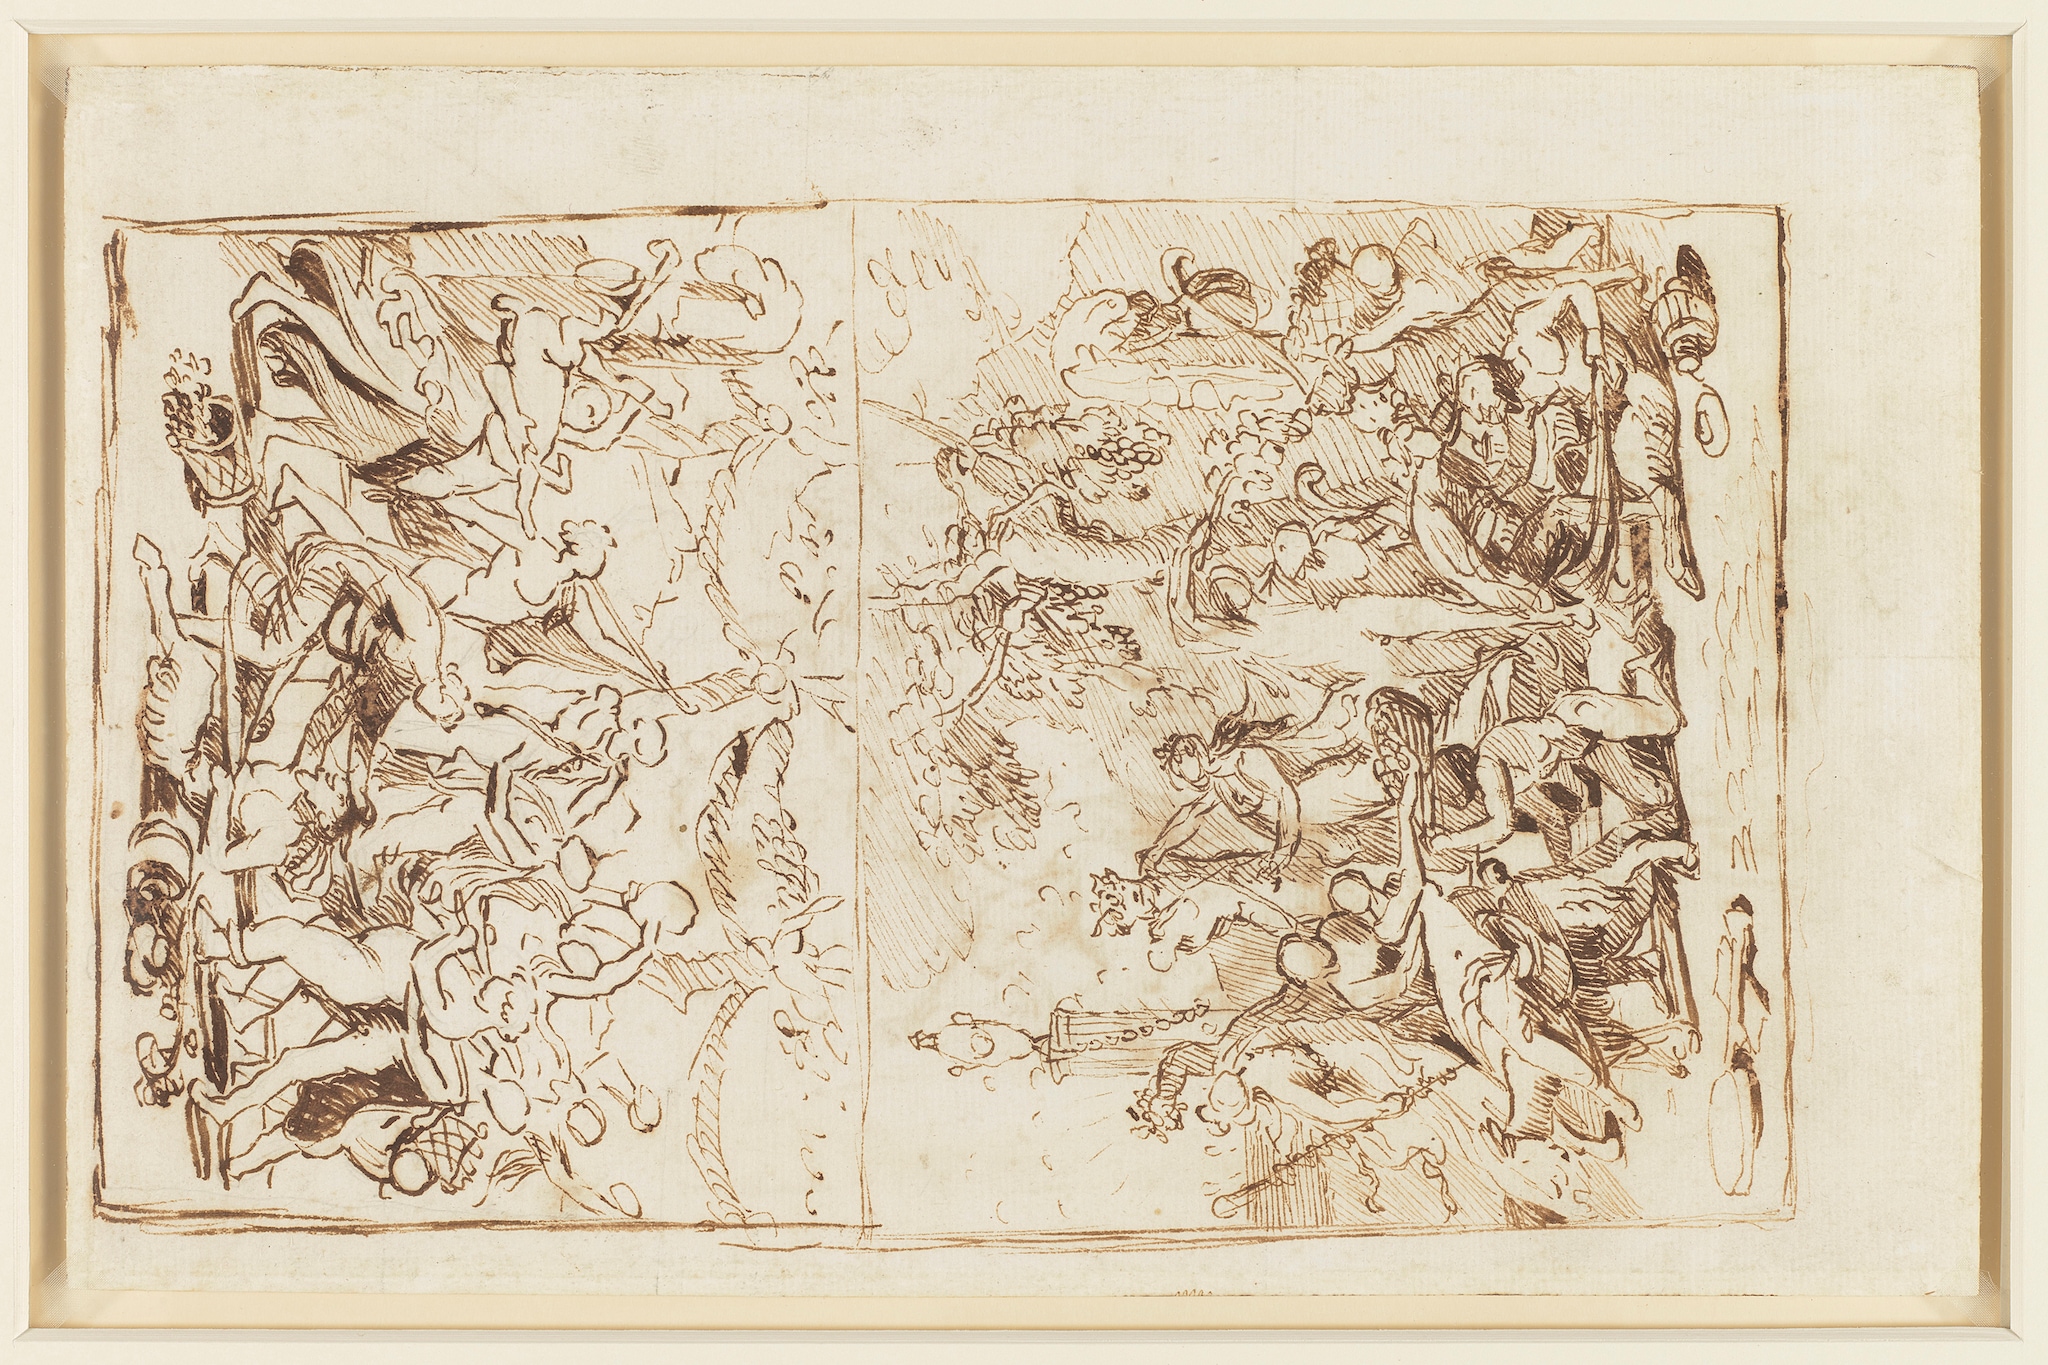 Nicolas Poussin Recto: The Triumph of Bacchus. Verso: The Triumph of Pan, about 1635-6 Pen and ink on paper 20.2 x 31.4 cm The Royal Collection / HM Queen Elizabeth II (RCIN 911905) Royal Collection Trust / © Her Majesty Queen Elizabeth II 2021 